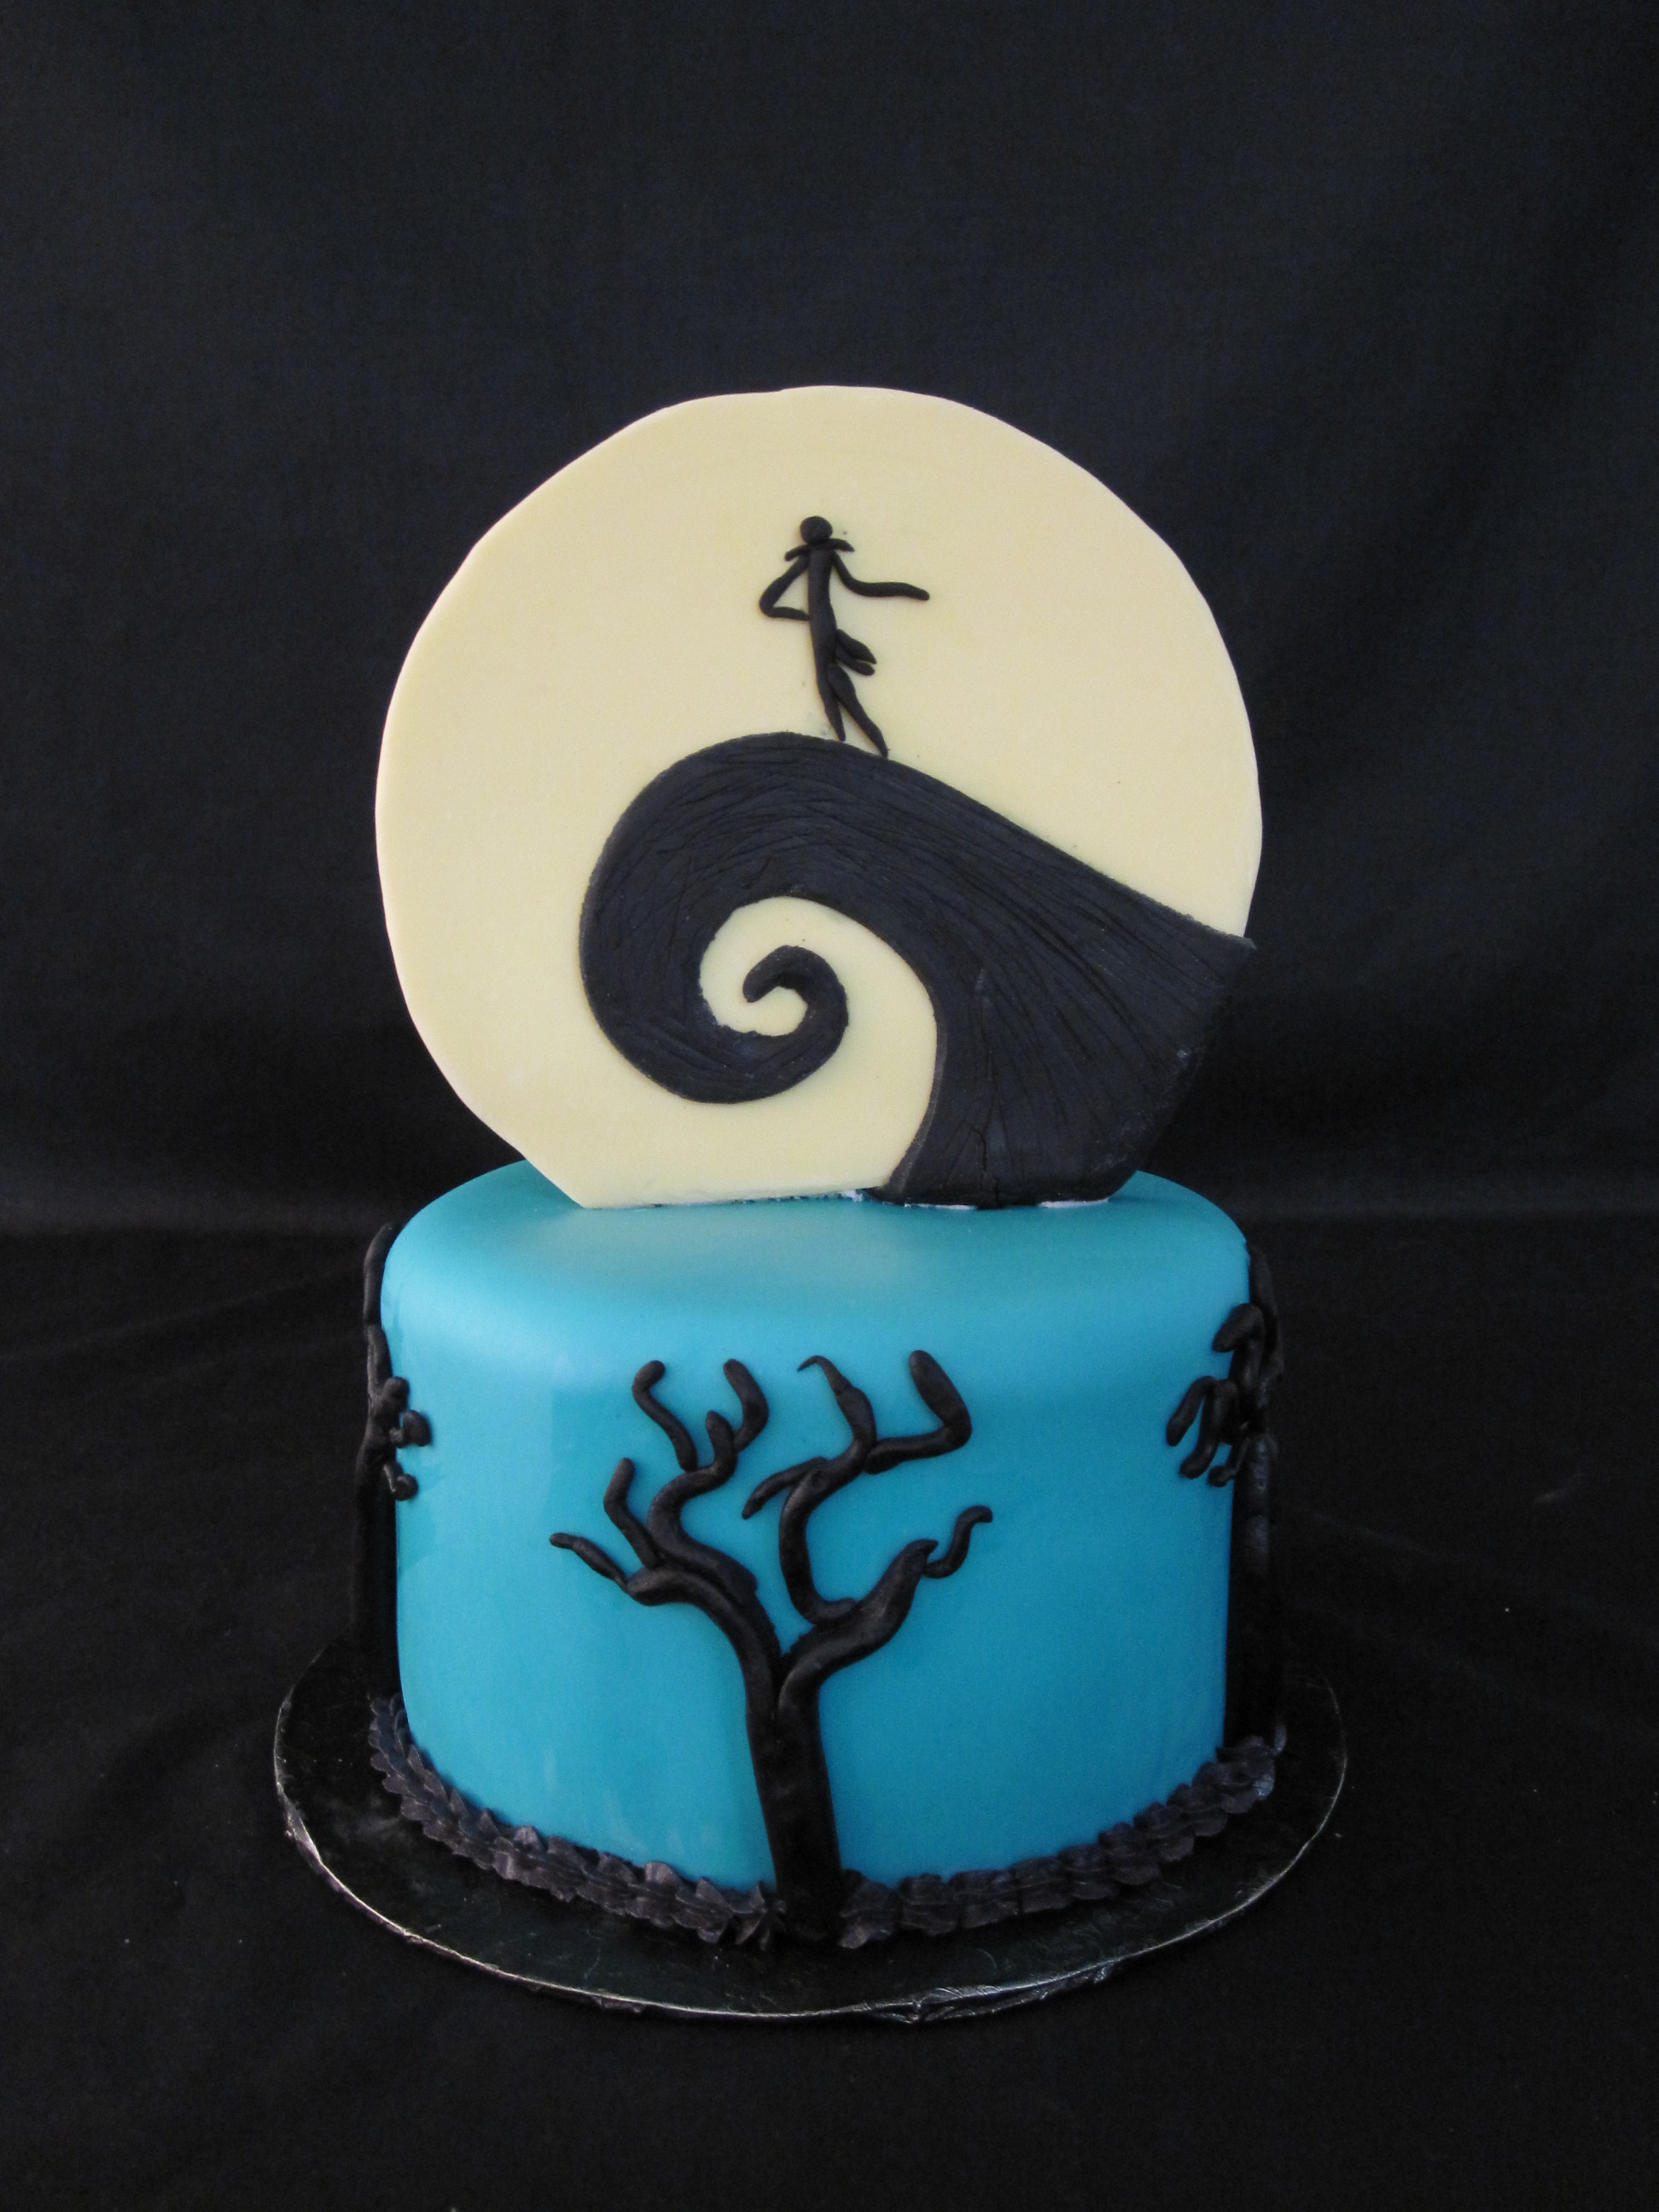 Nightmare Before Christmas Birthday Cake | The Twisted Sifter